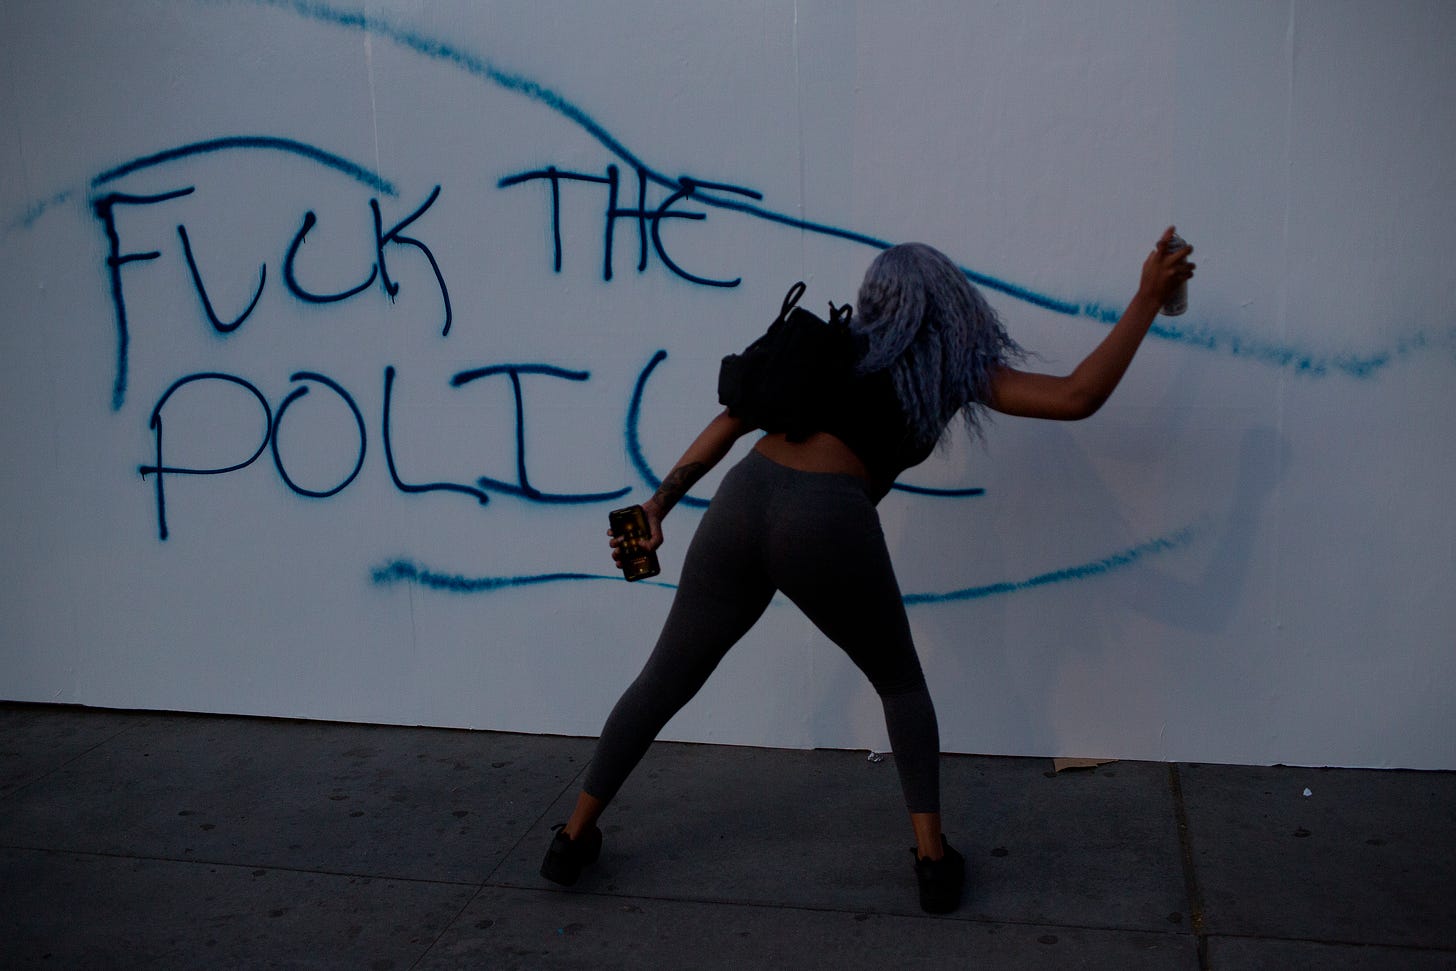 A protestor paints on a wall, May 31, 2020. (Photo by Andrew Lichtenstein/Corbis via Getty Images)